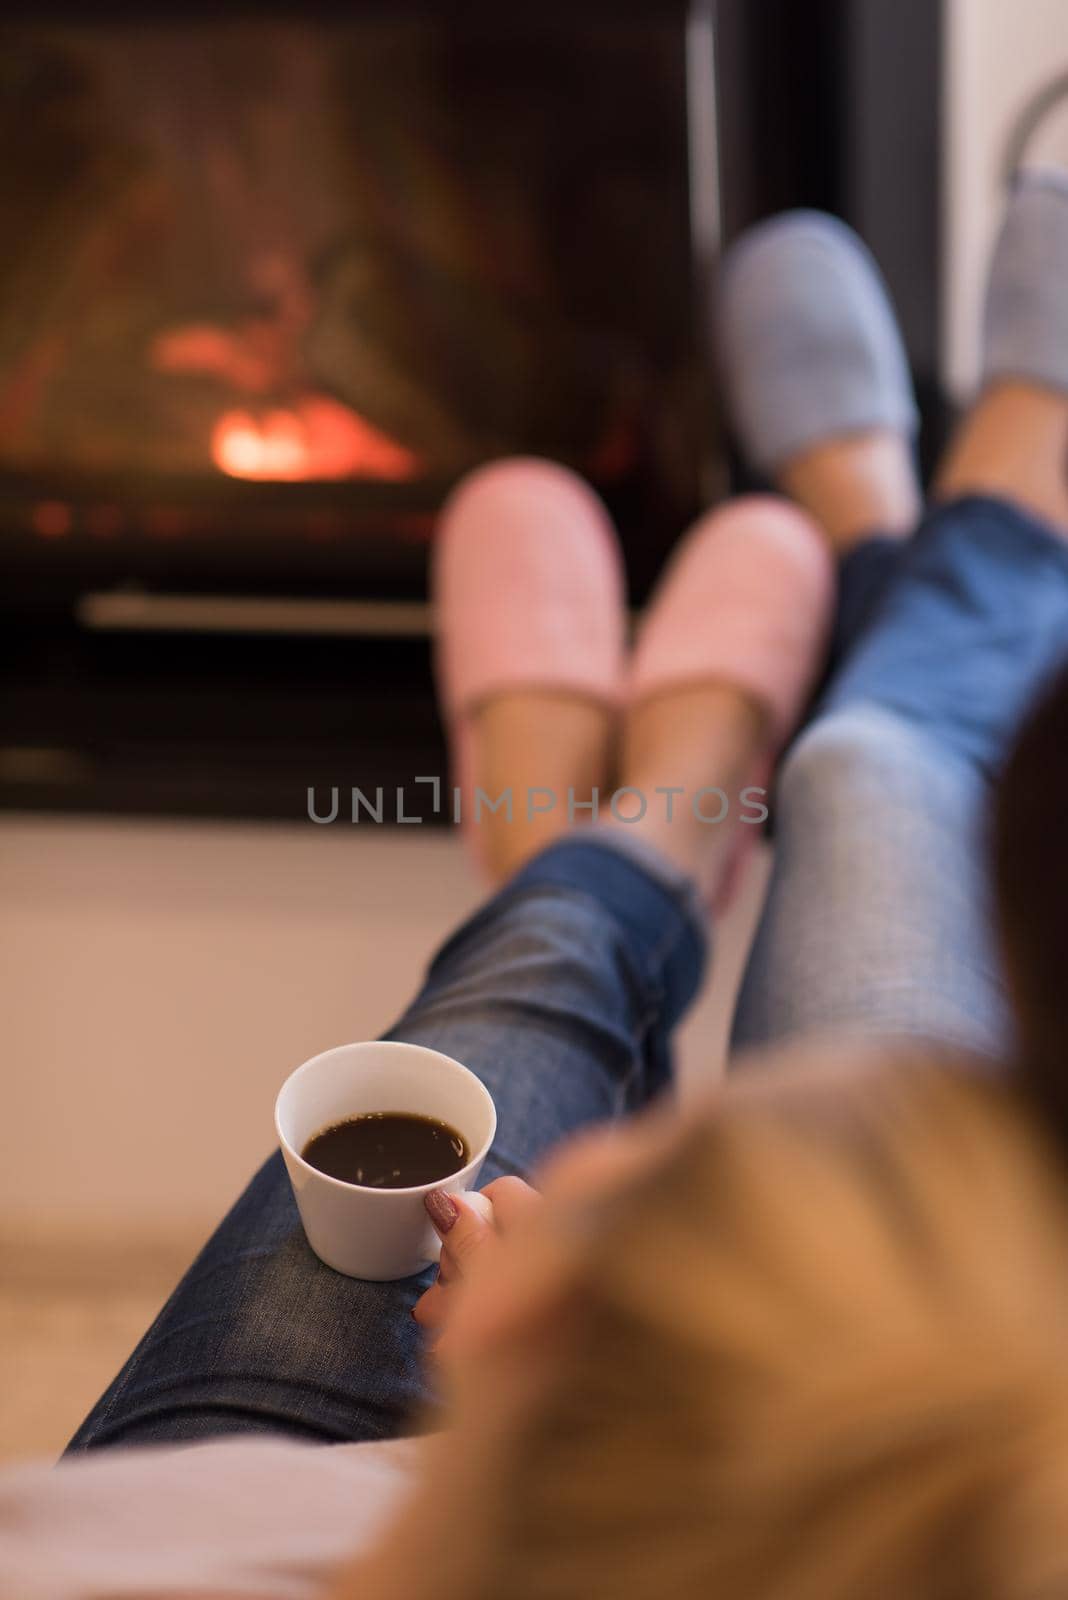 Young couple  in front of fireplace by dotshock